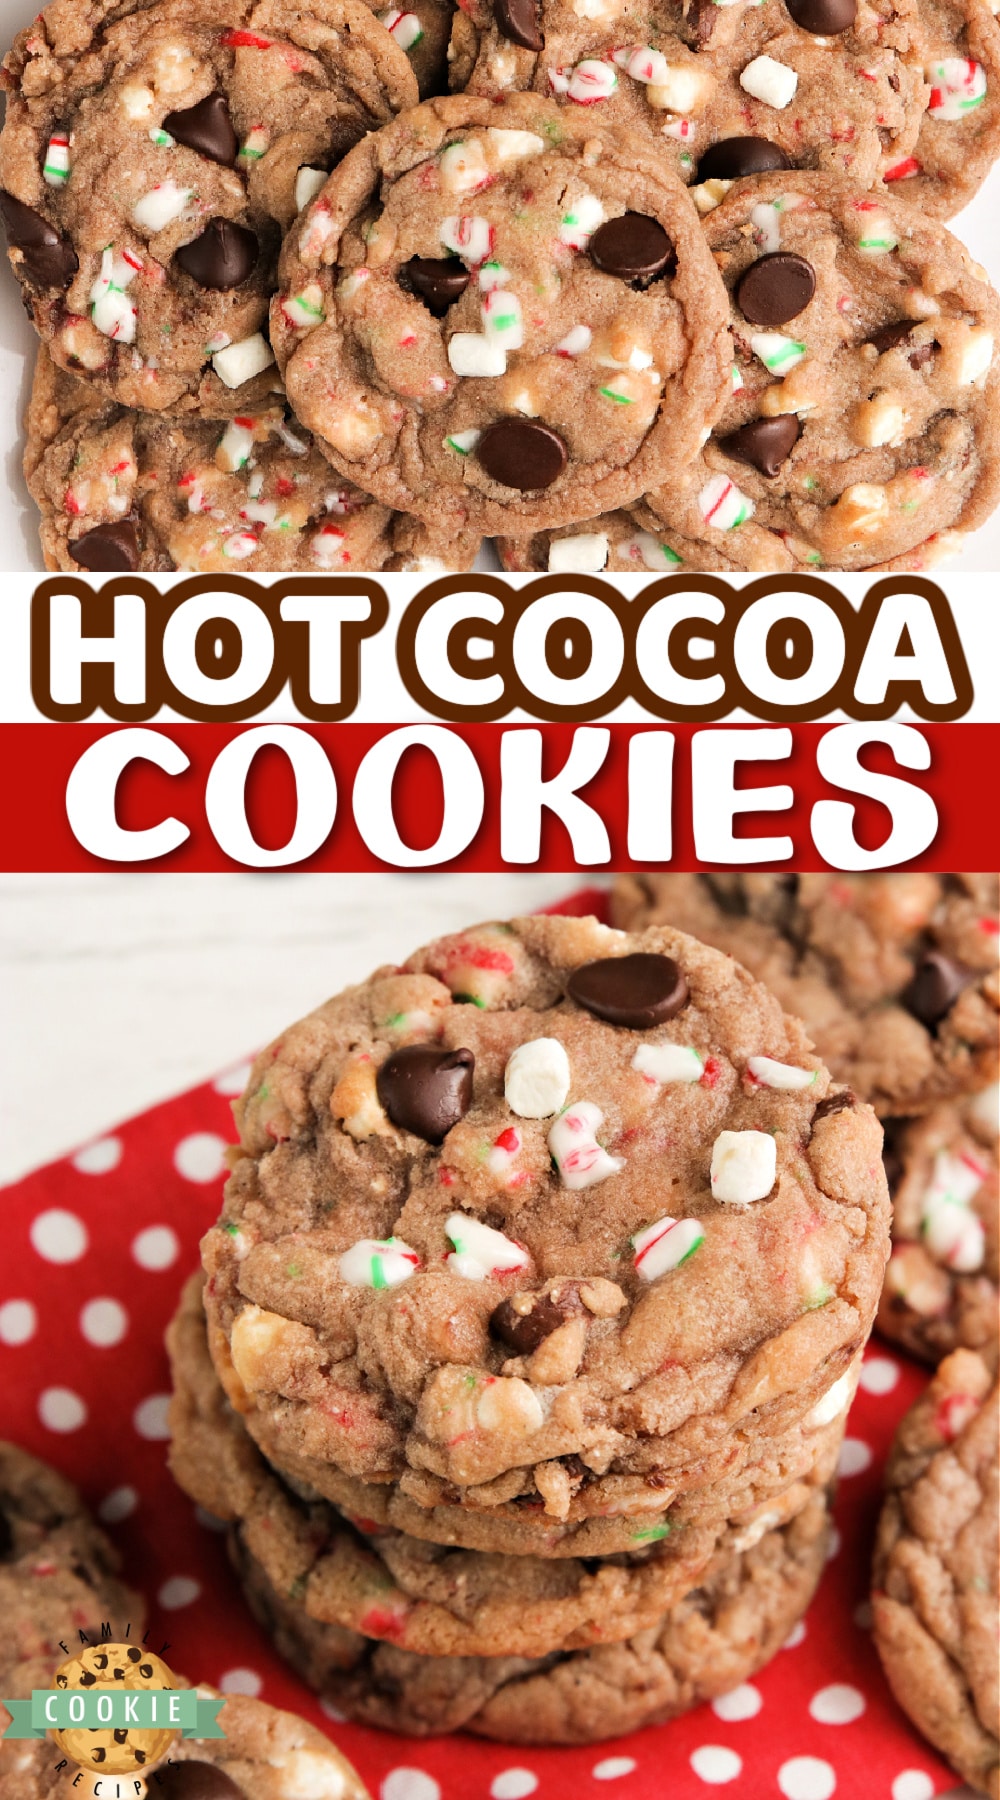 Hot Cocoa Cookies made with hot cocoa mix, chocolate chips, crushed candy canes and marshmallow bits. These hot chocolate cookies are simple to make and have all the flavors of a cup of your favorite hot cocoa! via @buttergirls